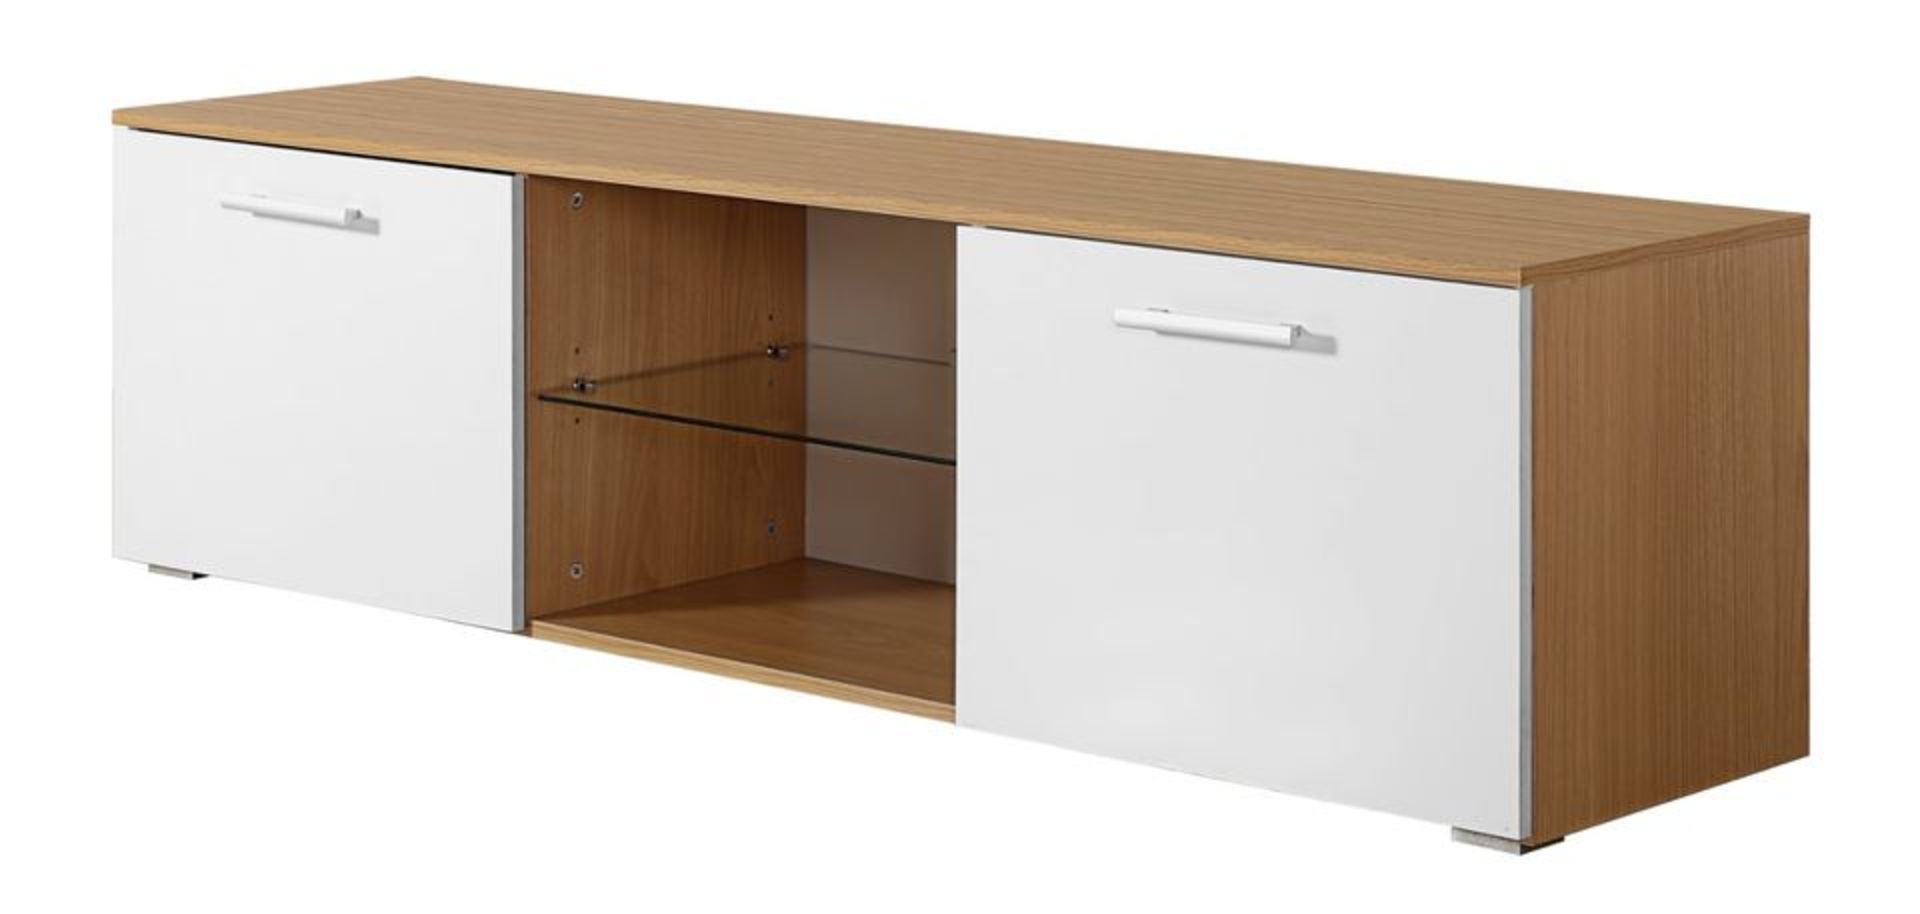 BRAND NEW 160CM WHITE ON OAK TV STAND (TV32) - Image 4 of 10